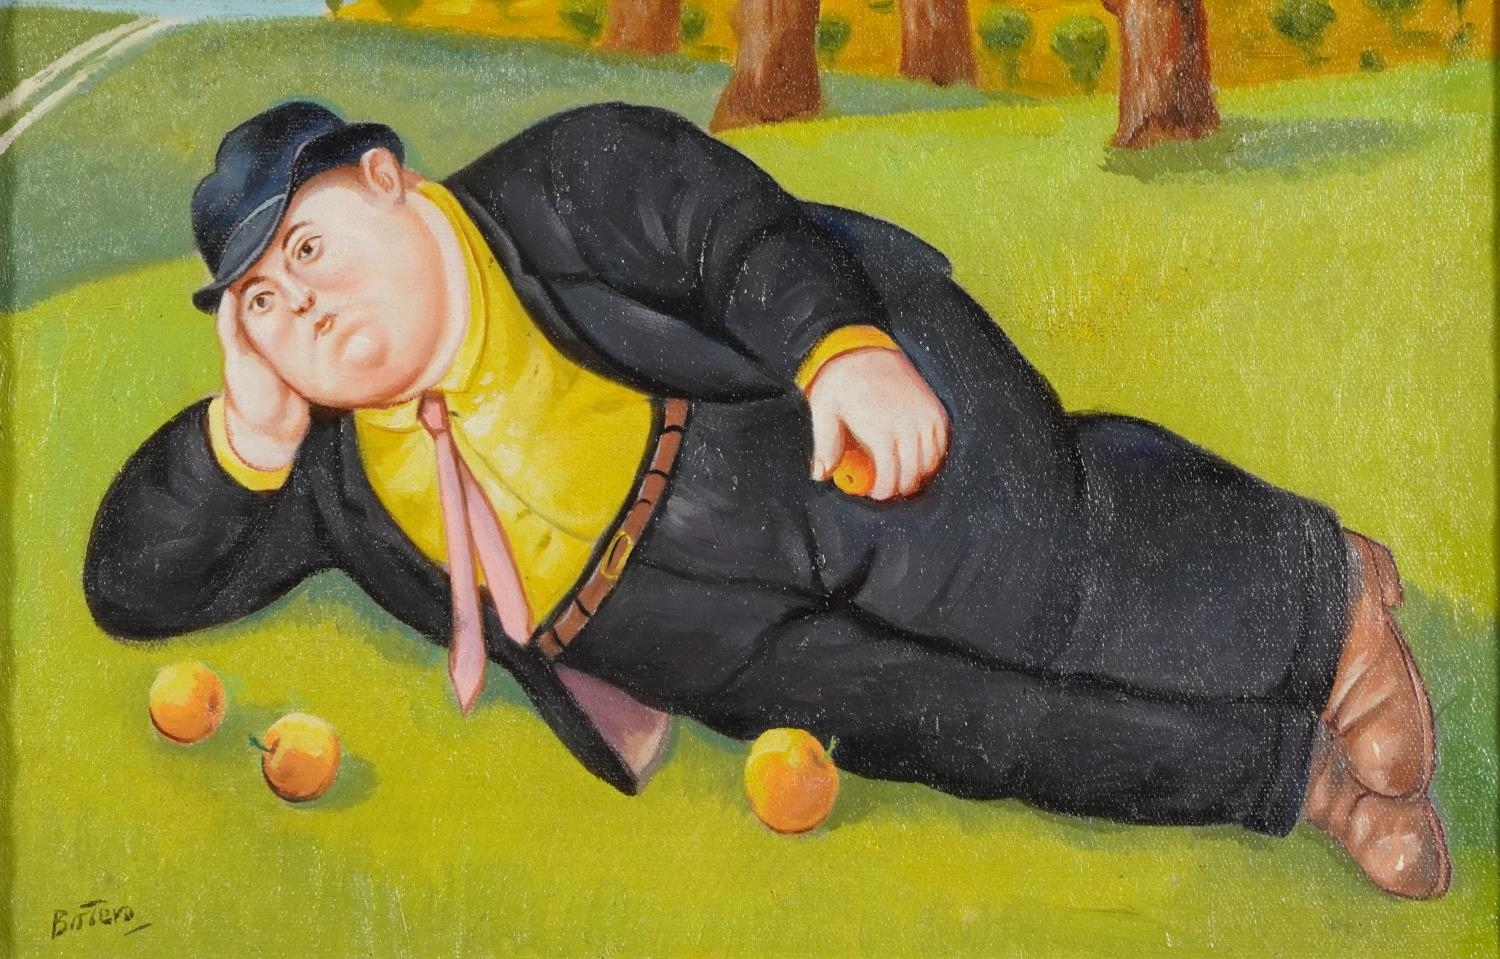 Artwork by Fernando Botero, Manner of Fernando Botero - Man in a field with four oranges, Made of oil on board, mount